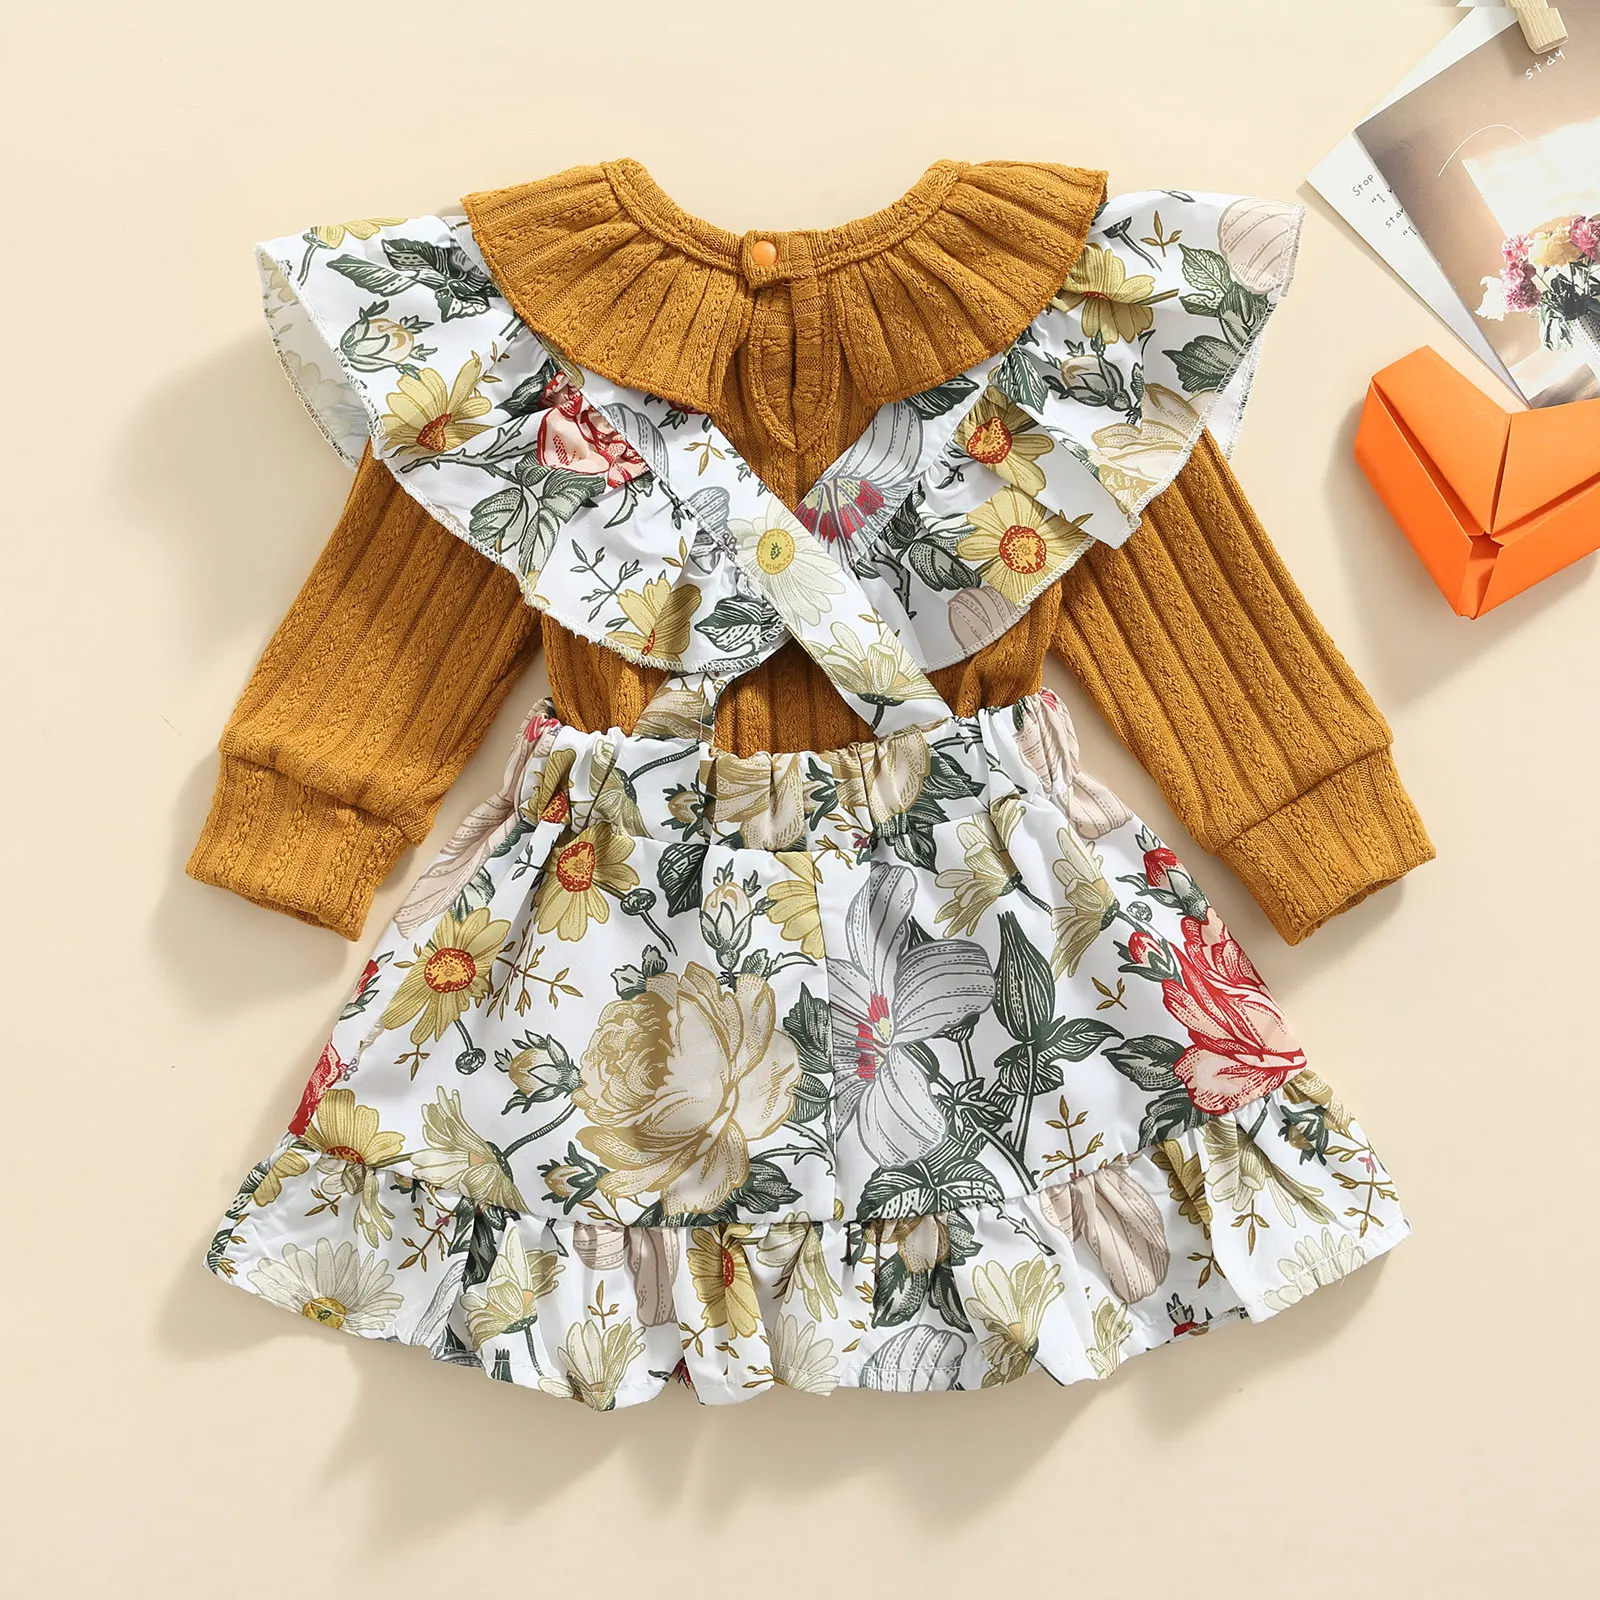 baby clothes penguin set Ma&Baby 0-24M Floral Baby Girl Clothes Set Newborn Infant Girls Ruffles Romper Skirts Flower Print Outfits Autumn Spring DD88 Baby Clothing Set discount